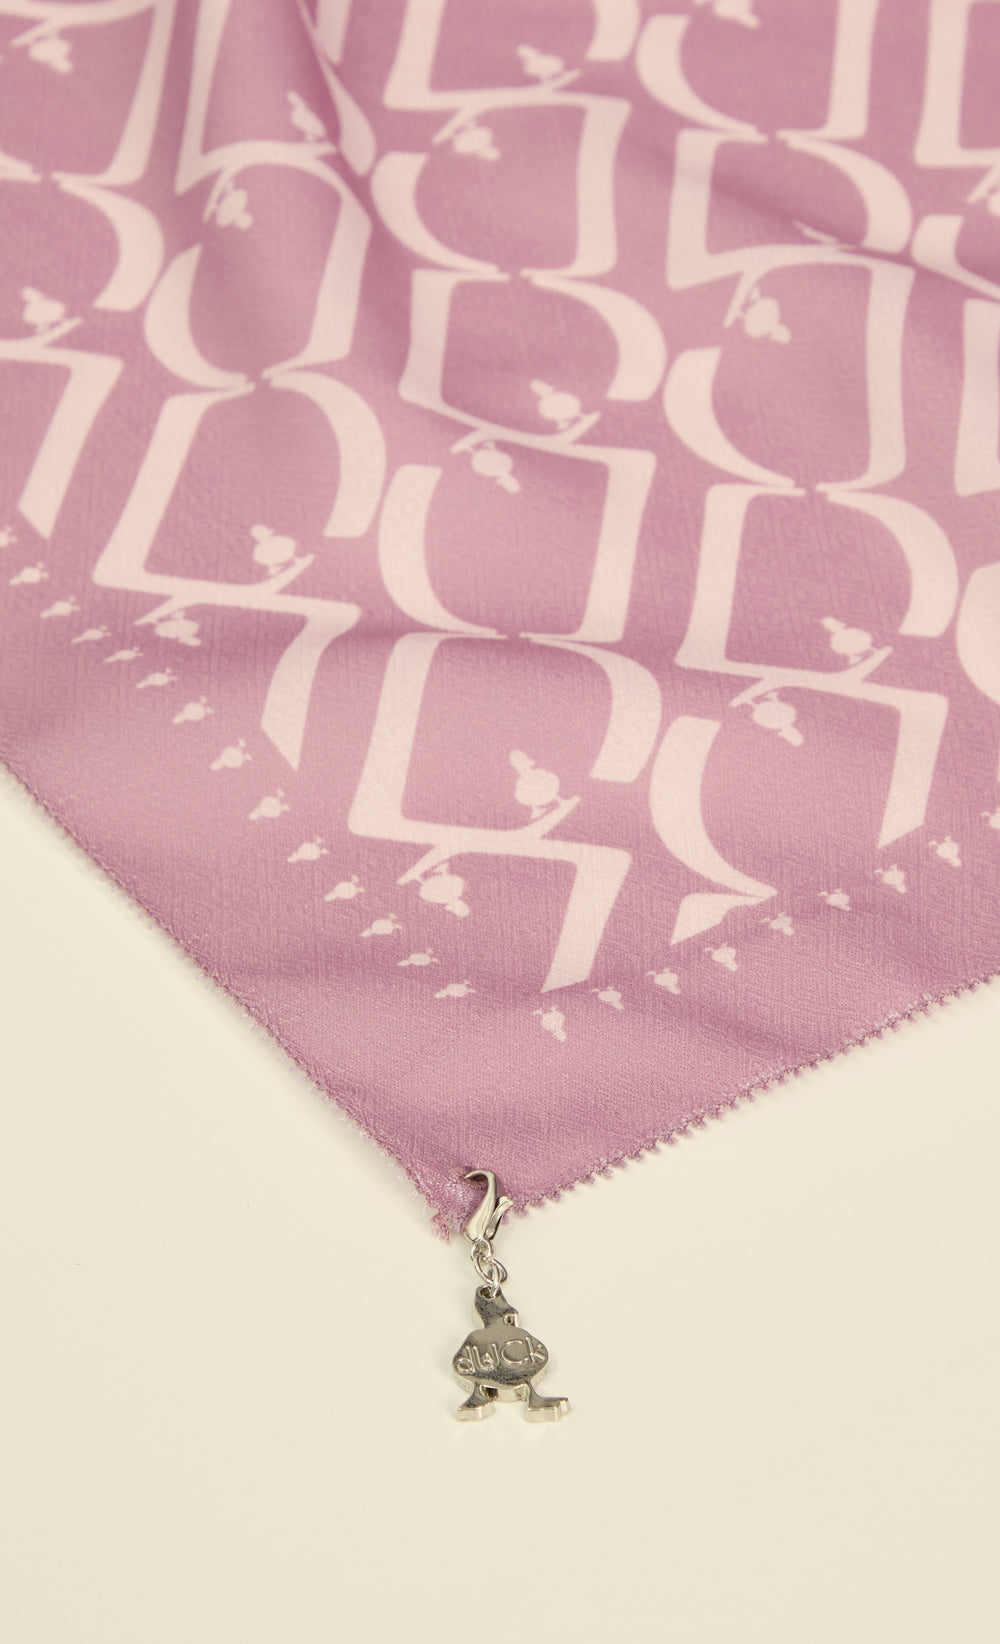 D Monogram dUCk Voile Square Scarf in Berry Chantilly